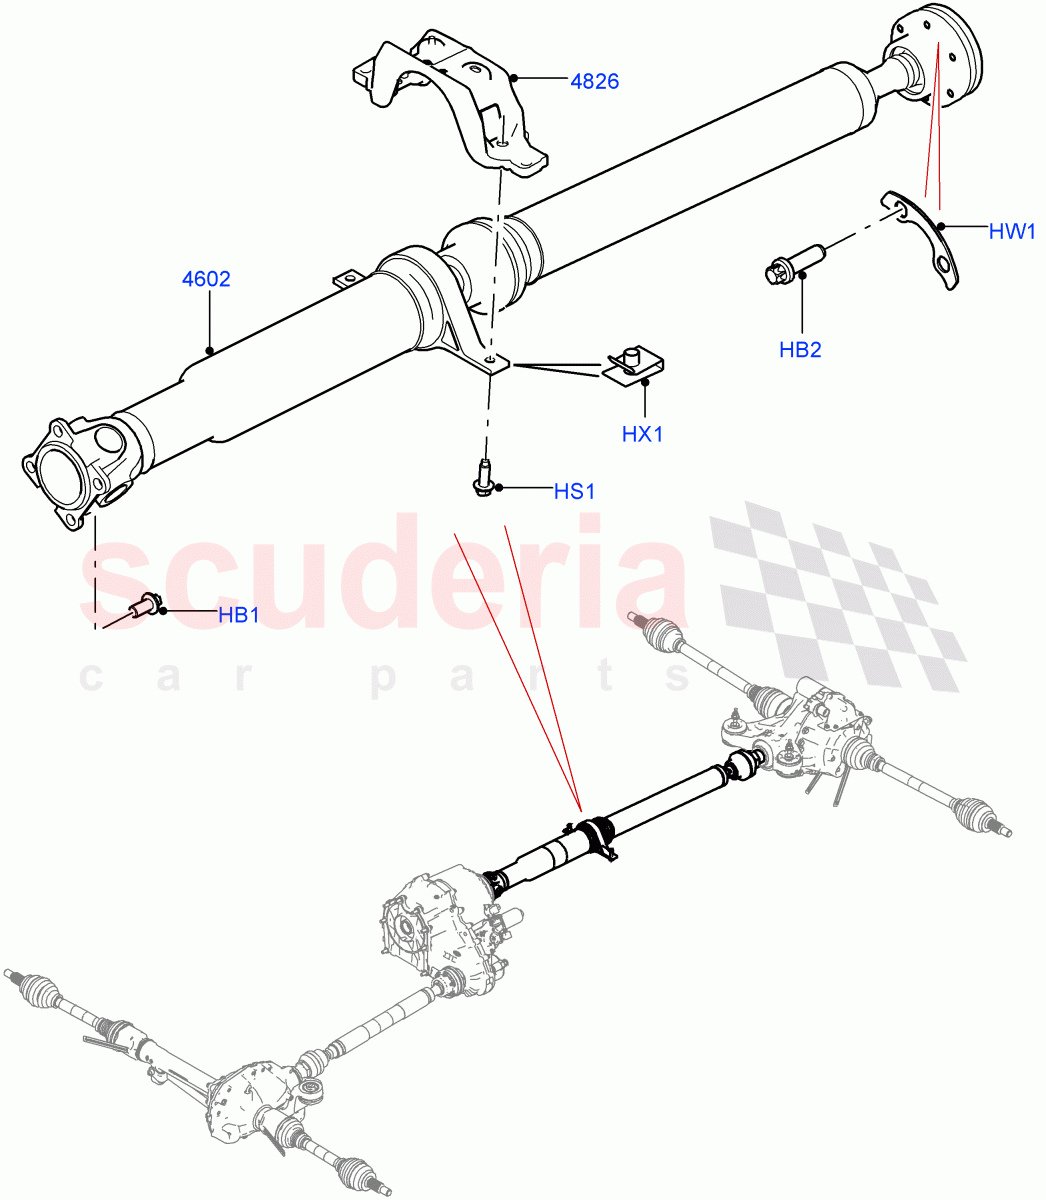 Drive Shaft - Rear Axle Drive(Propshaft, Nitra Plant Build)((V)FROMK2000001,(V)TOL2999999) of Land Rover Land Rover Discovery 5 (2017+) [3.0 DOHC GDI SC V6 Petrol]